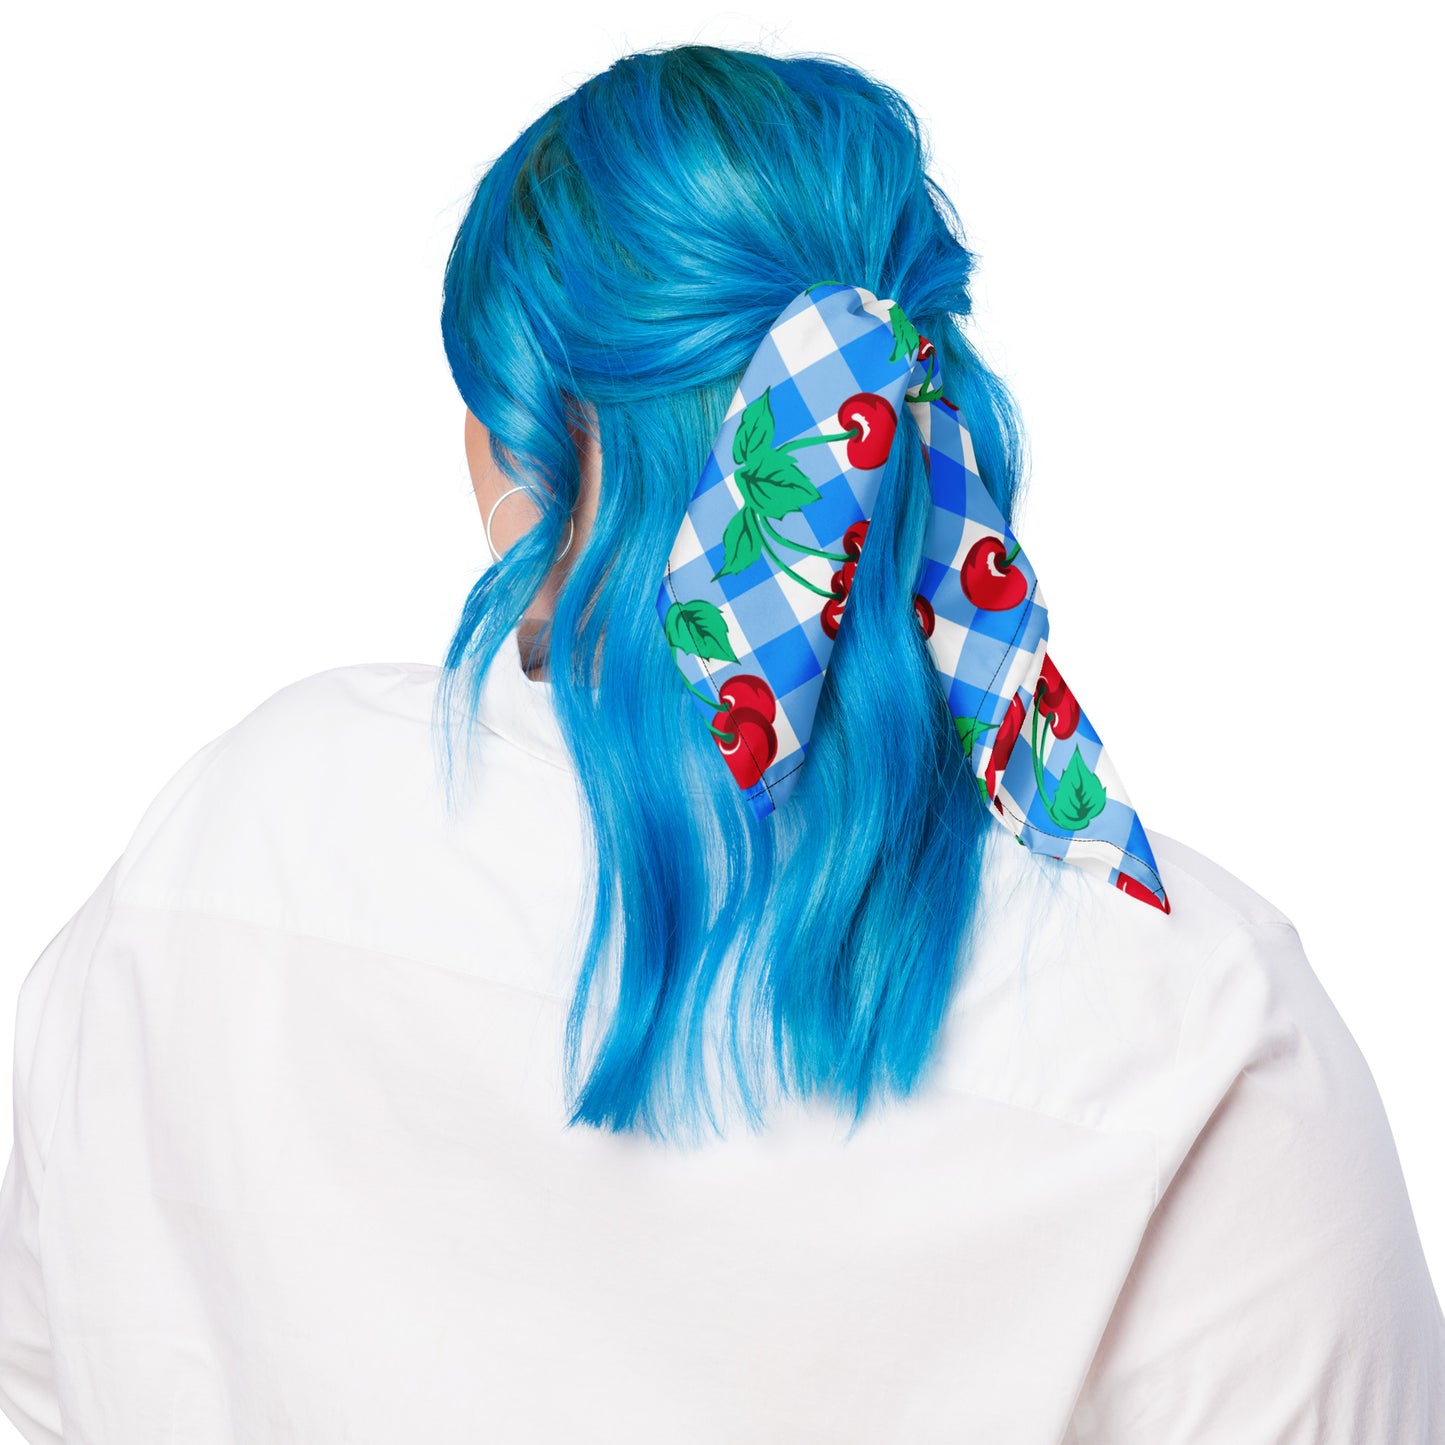 Cyndi Blue Gingham Cherry Girl All Bandana | Pinup Couture Relaxed